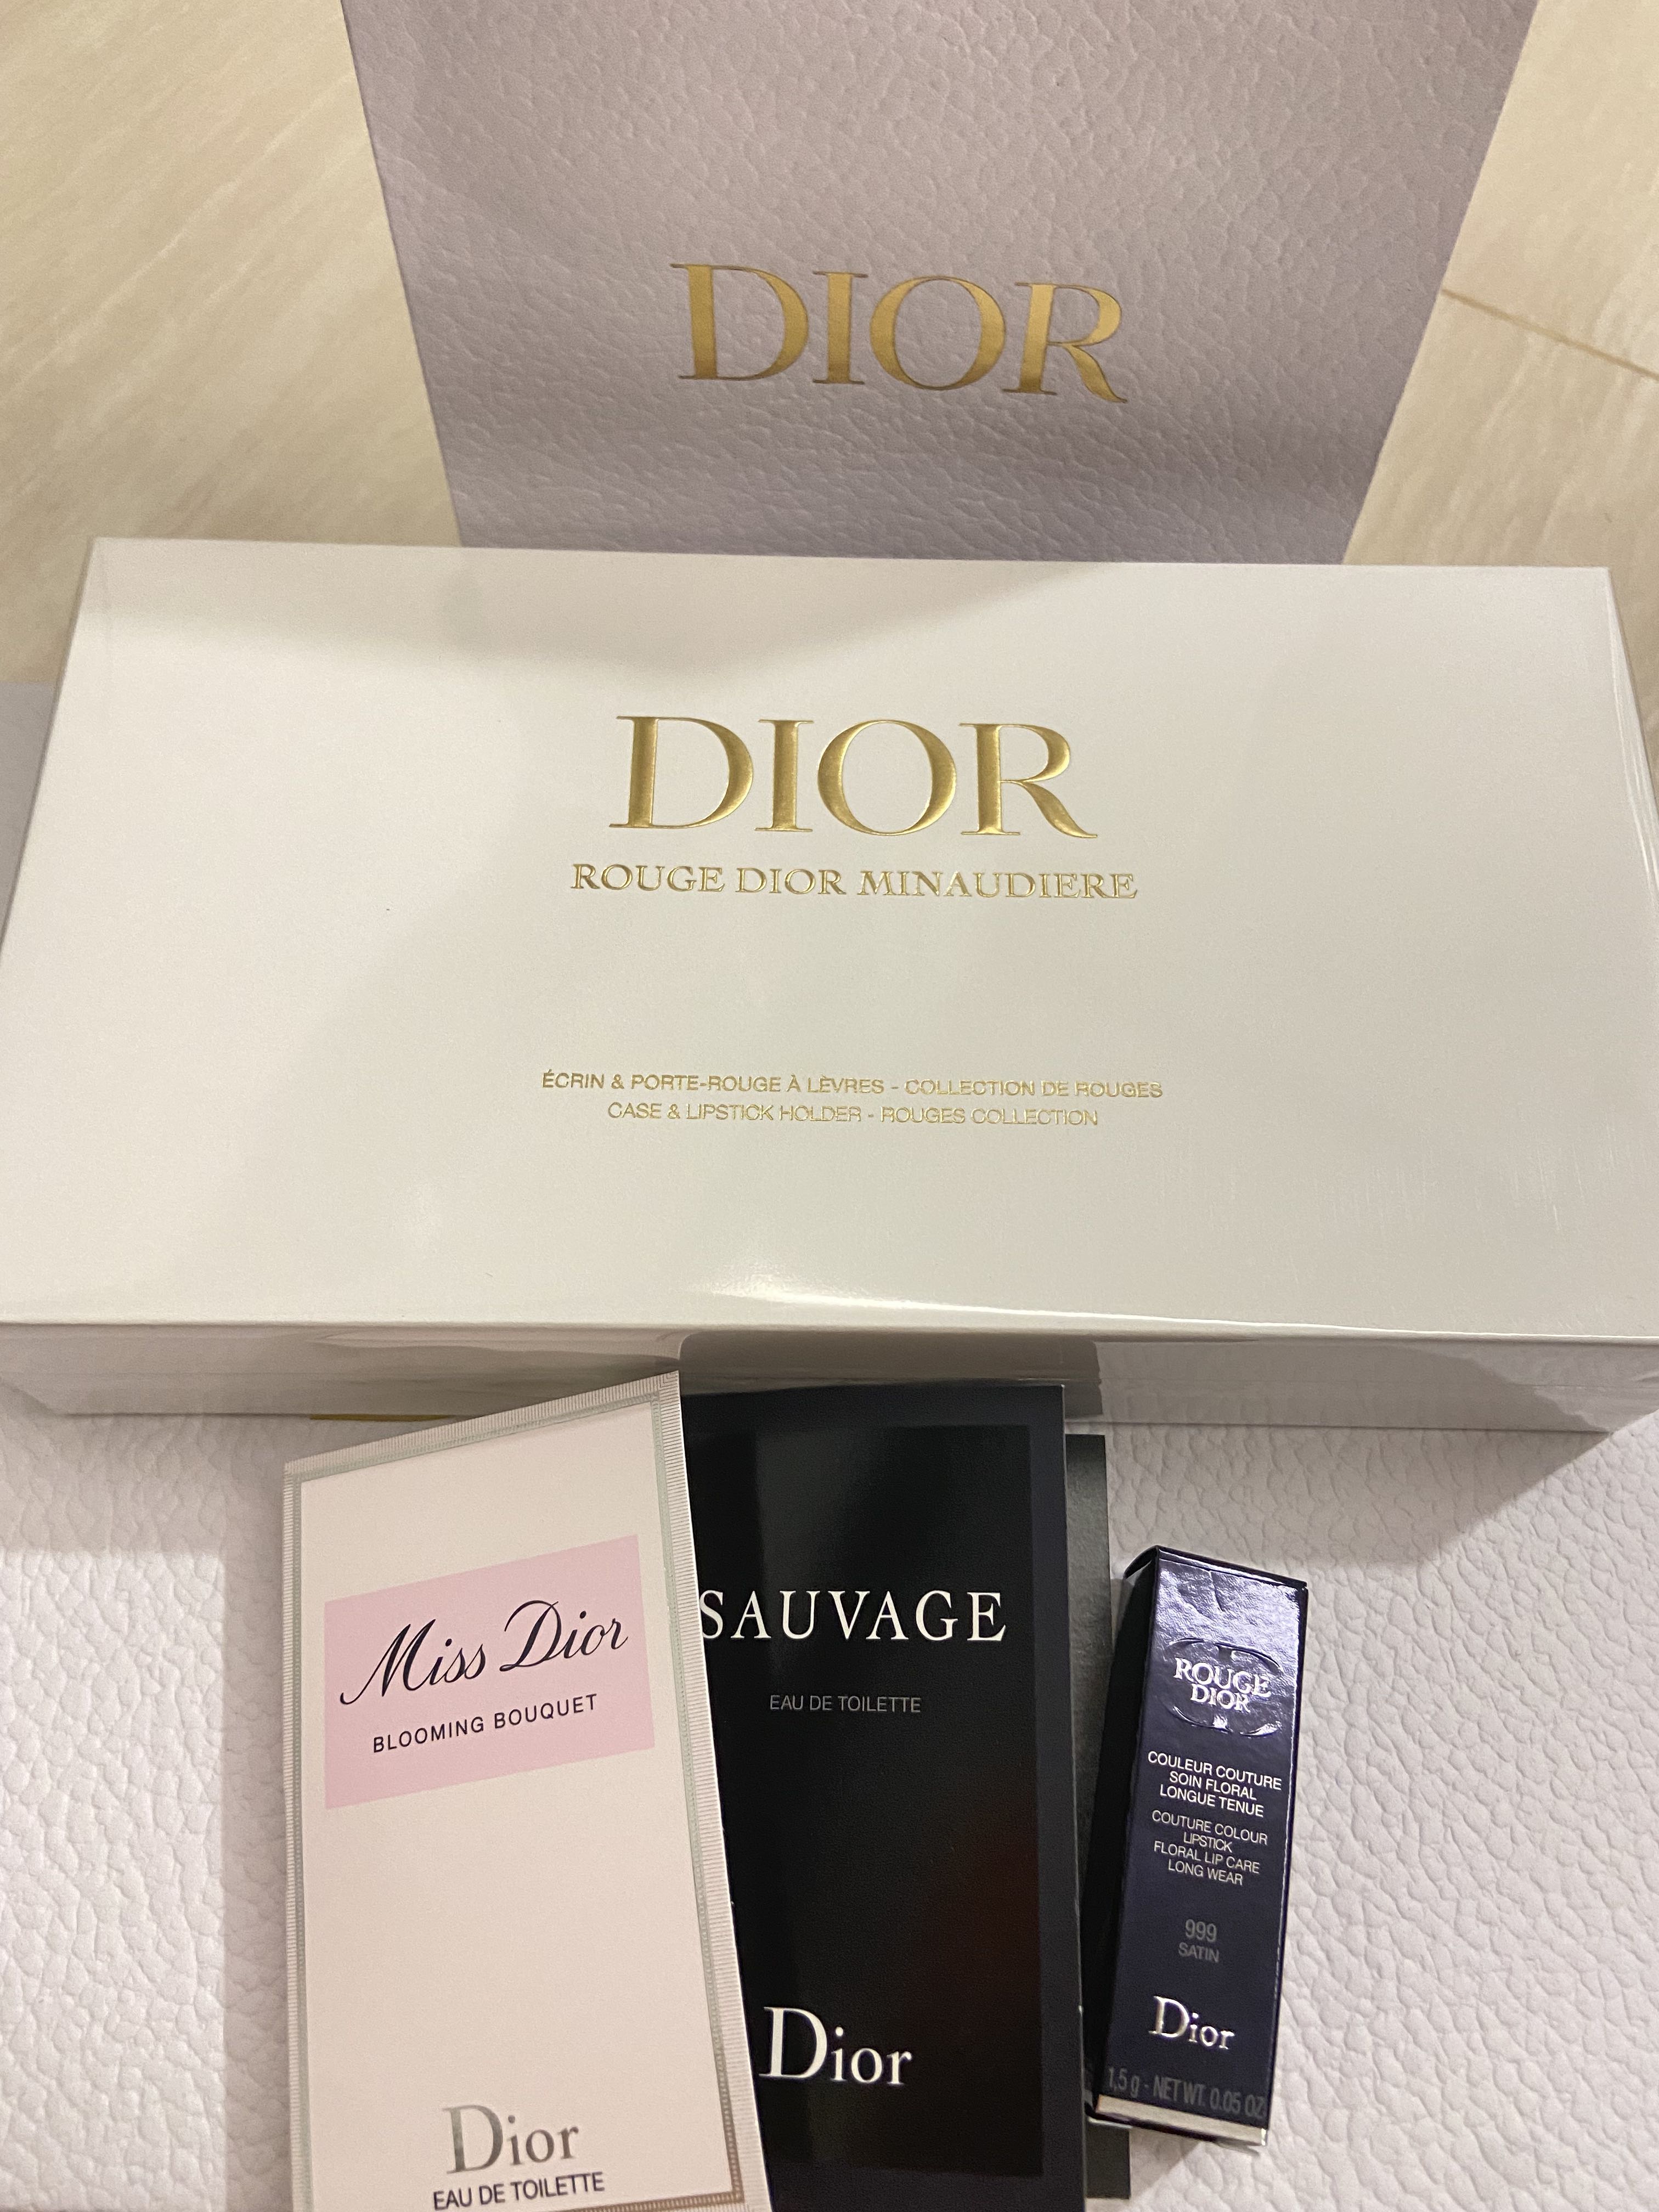 Dior rouge minaudiere gold case lipsticks set, Beauty & Personal Care ...